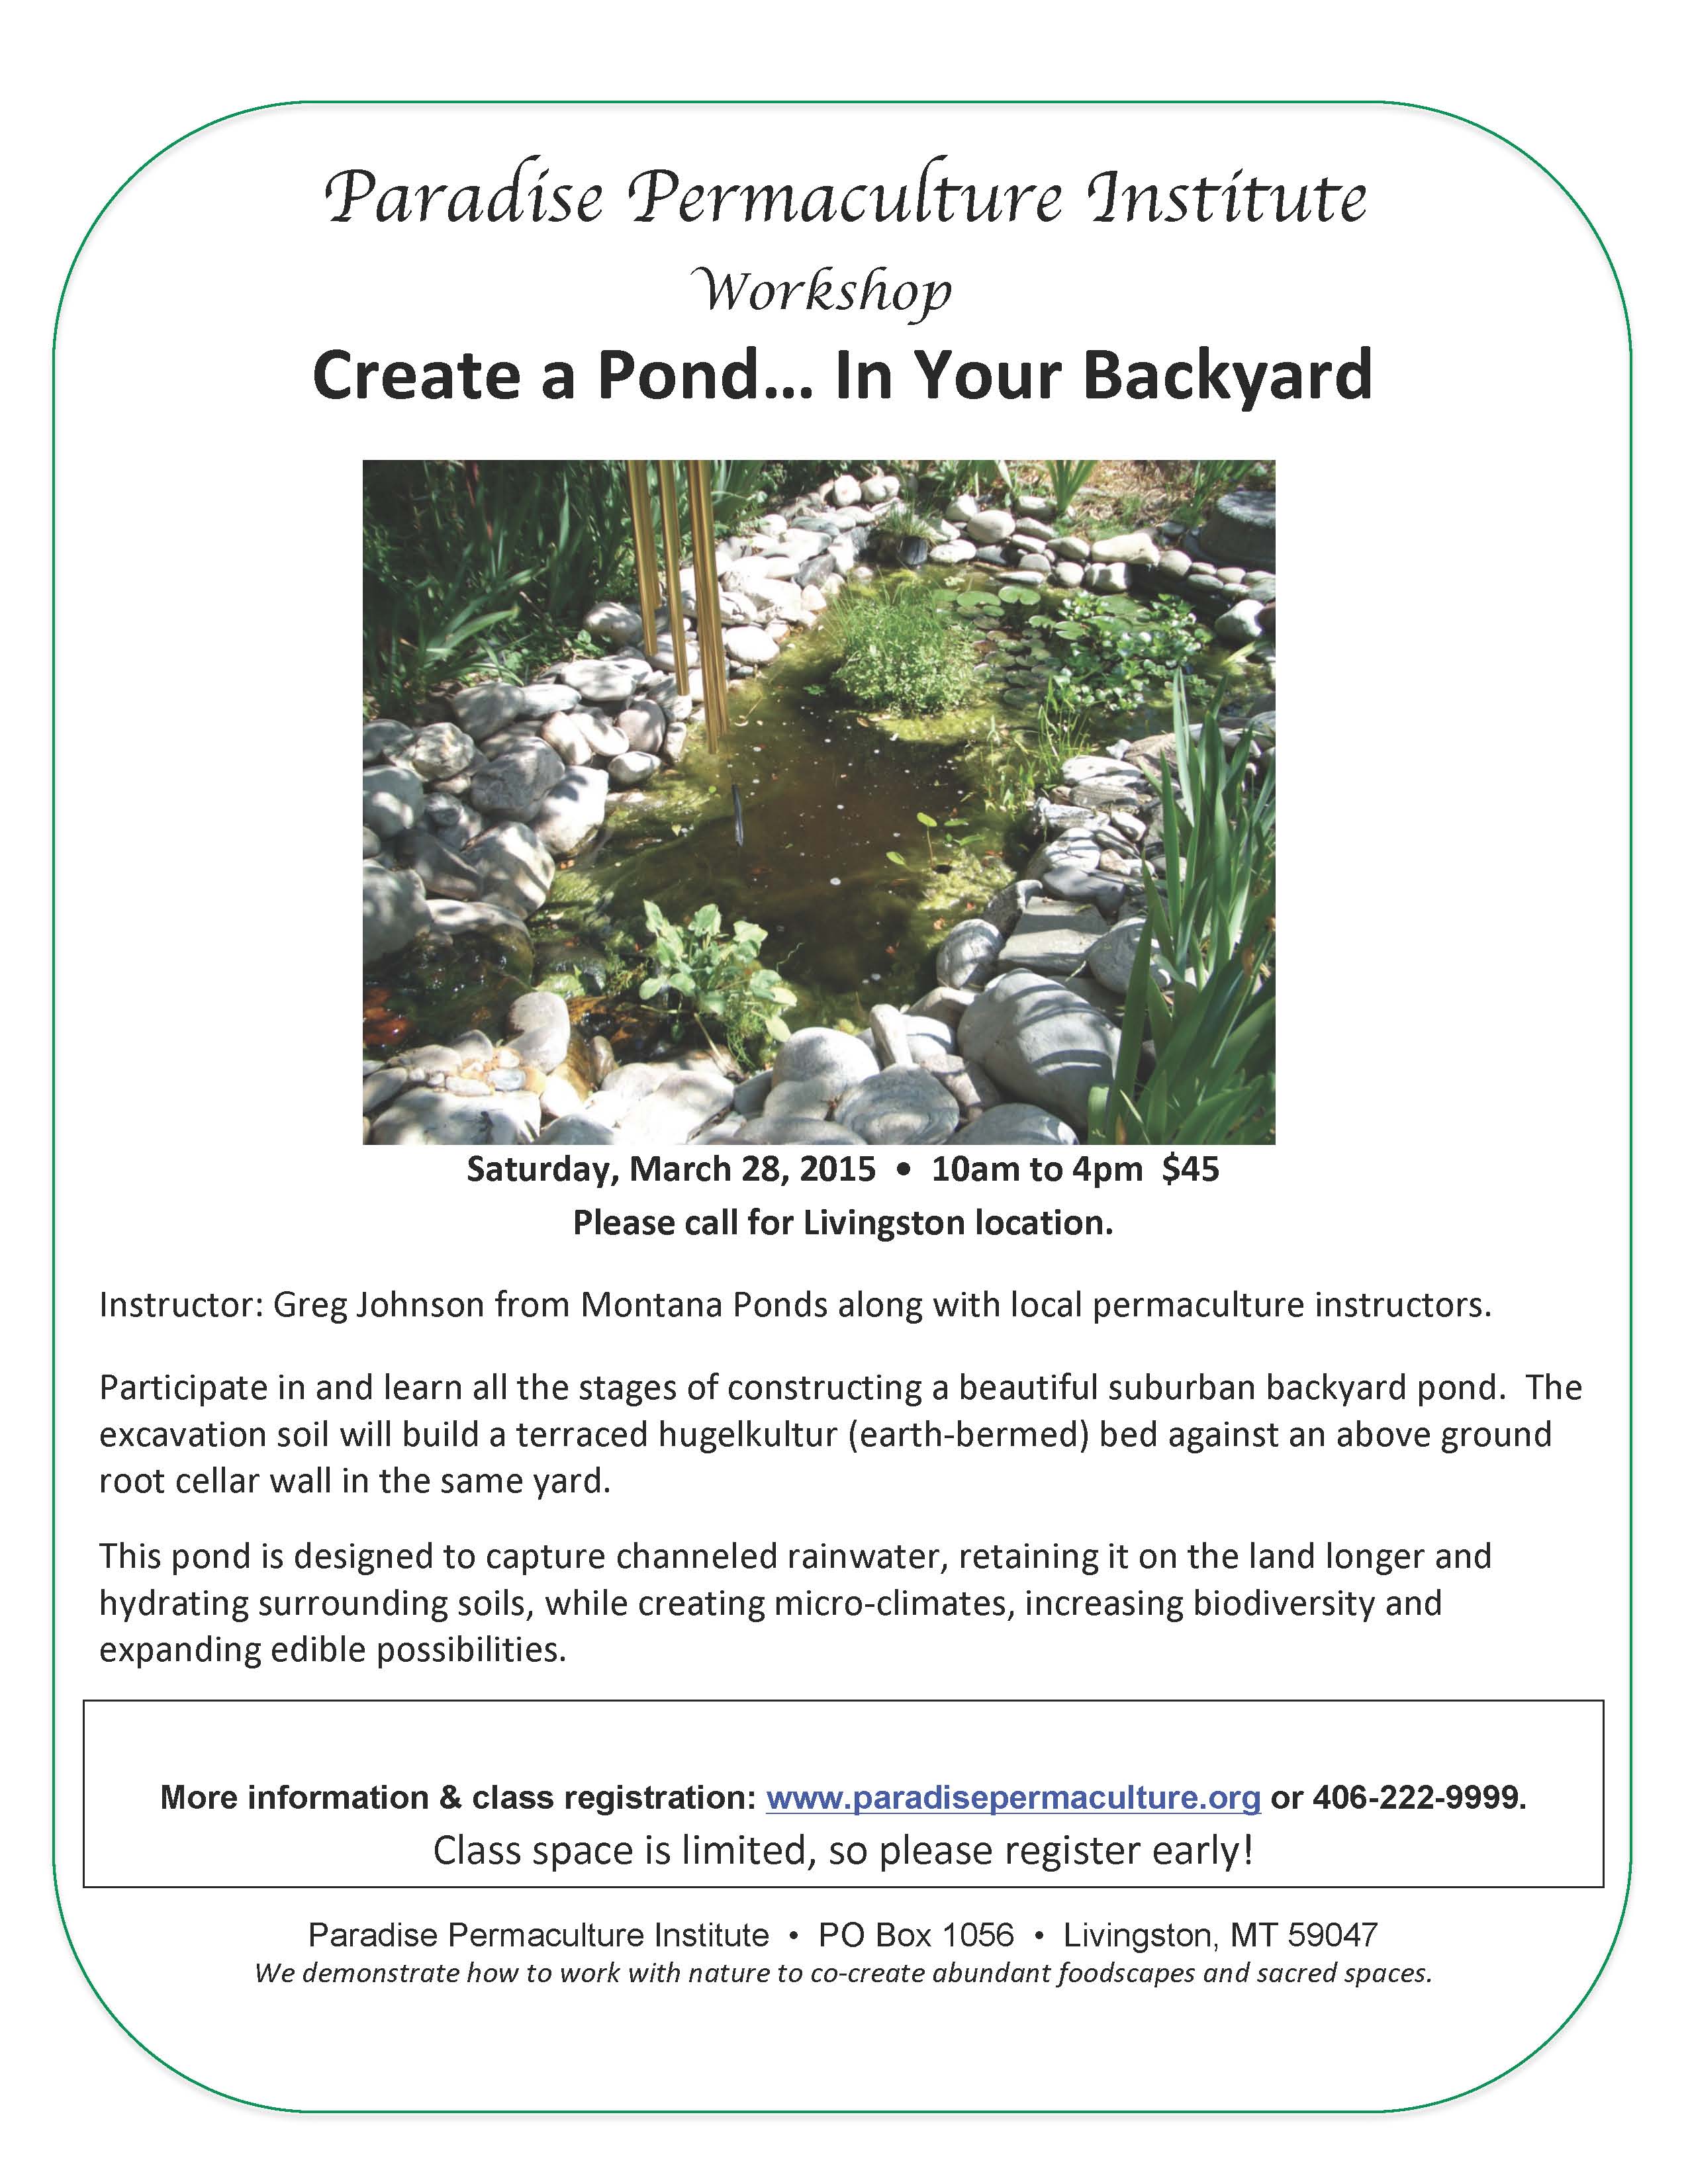 Paradise Permaculture backyard ponds class March 28 2015